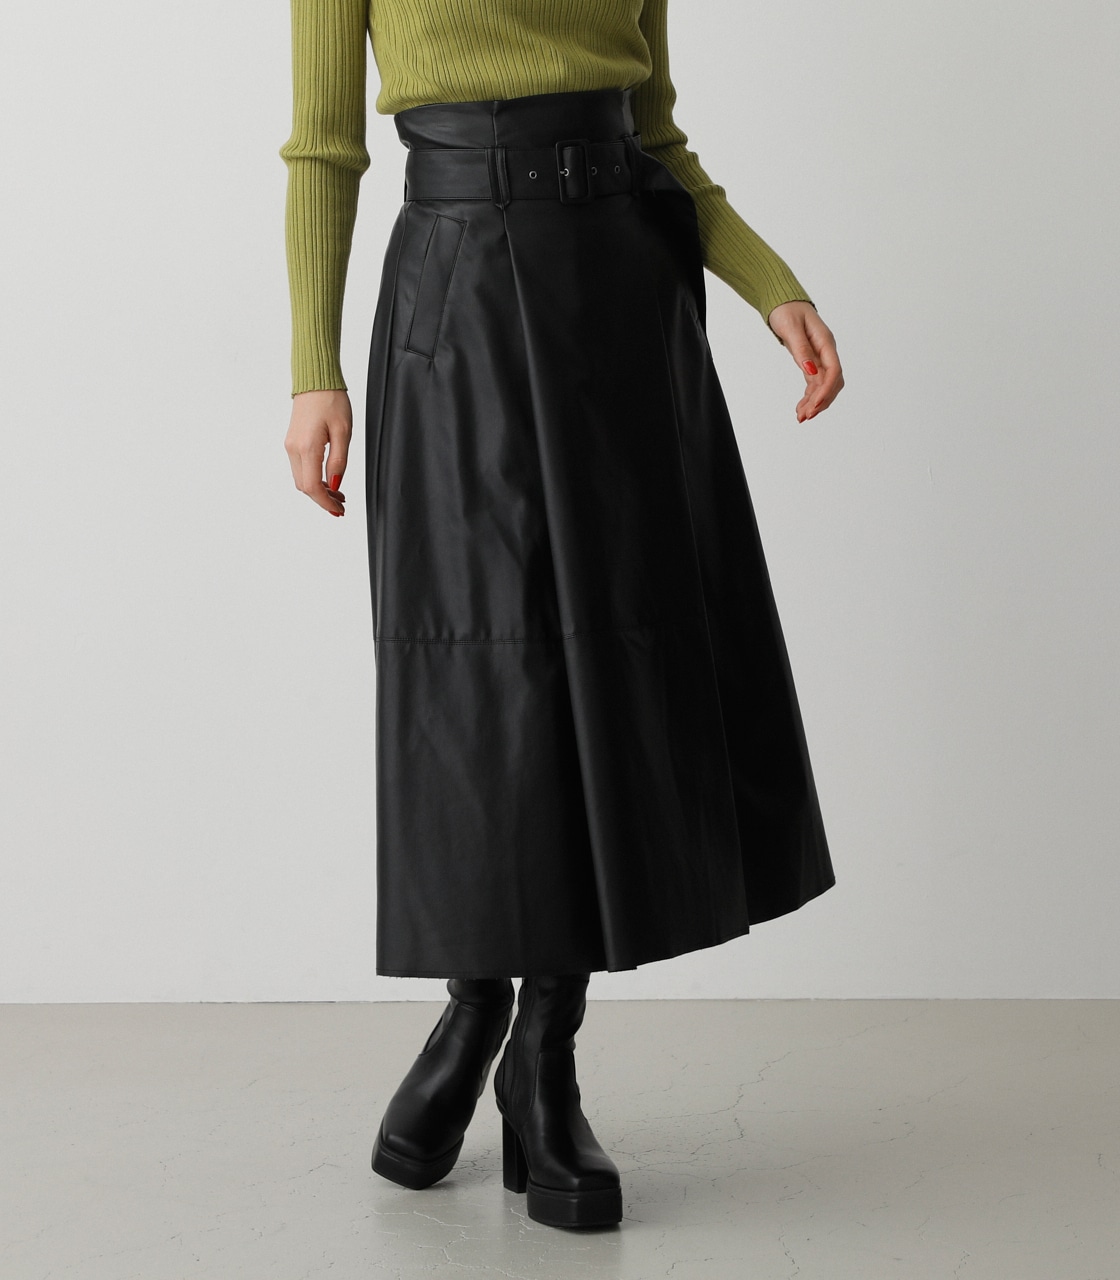 FAUX LEATHER HIGH WAIST SKIRT/フェイクレザーハイウエストスカート 詳細画像 BLK 2